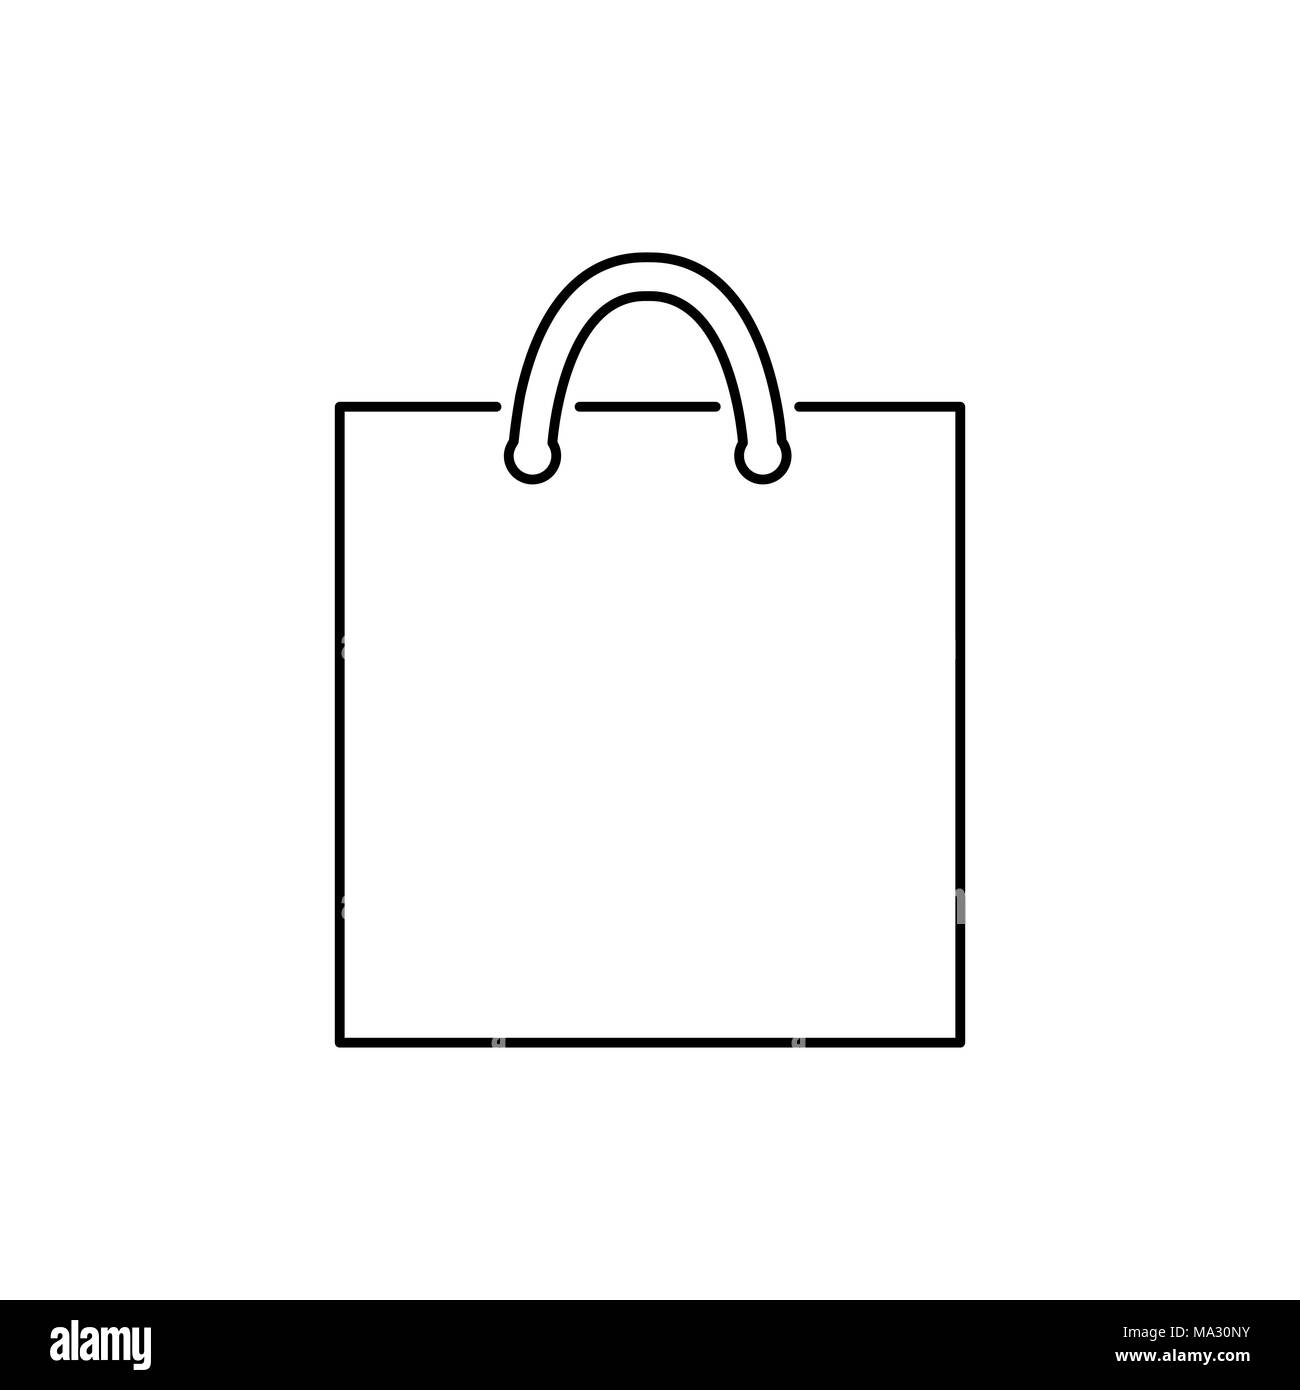 Paper bag icon flat simple vector illustration. Stock Vector